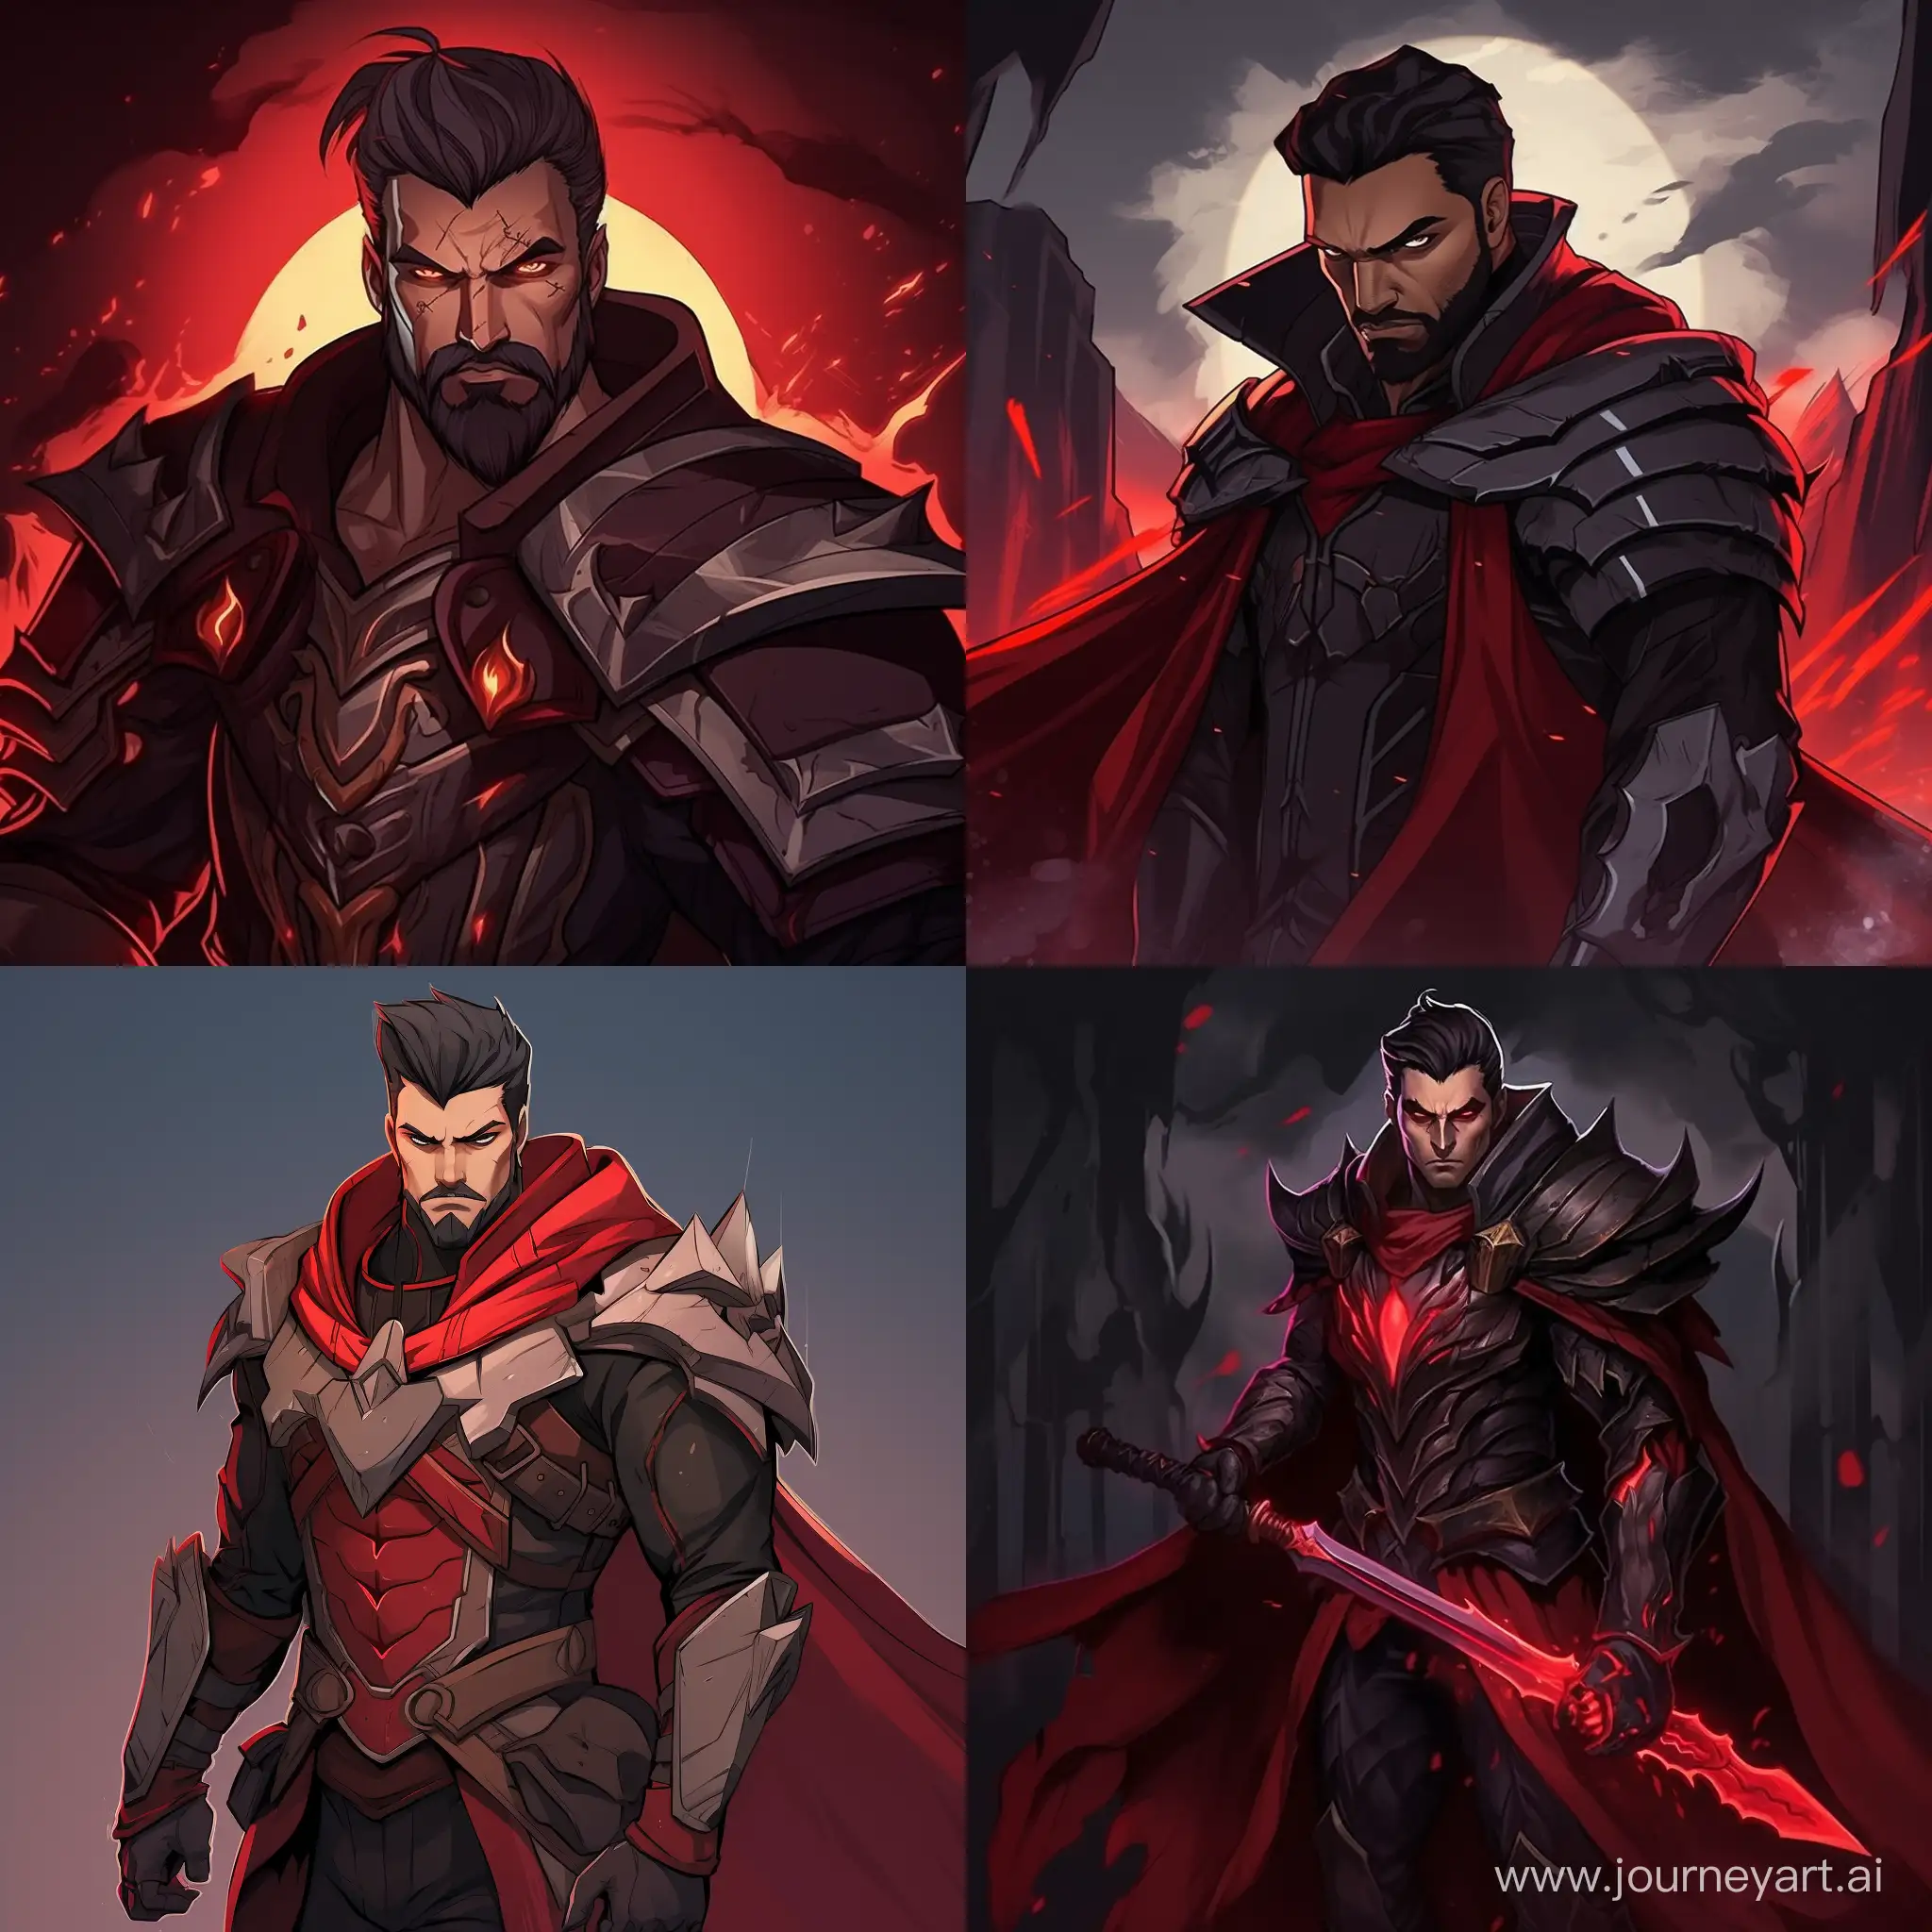 Darius from League of Legends in the style of the animated series Arcane